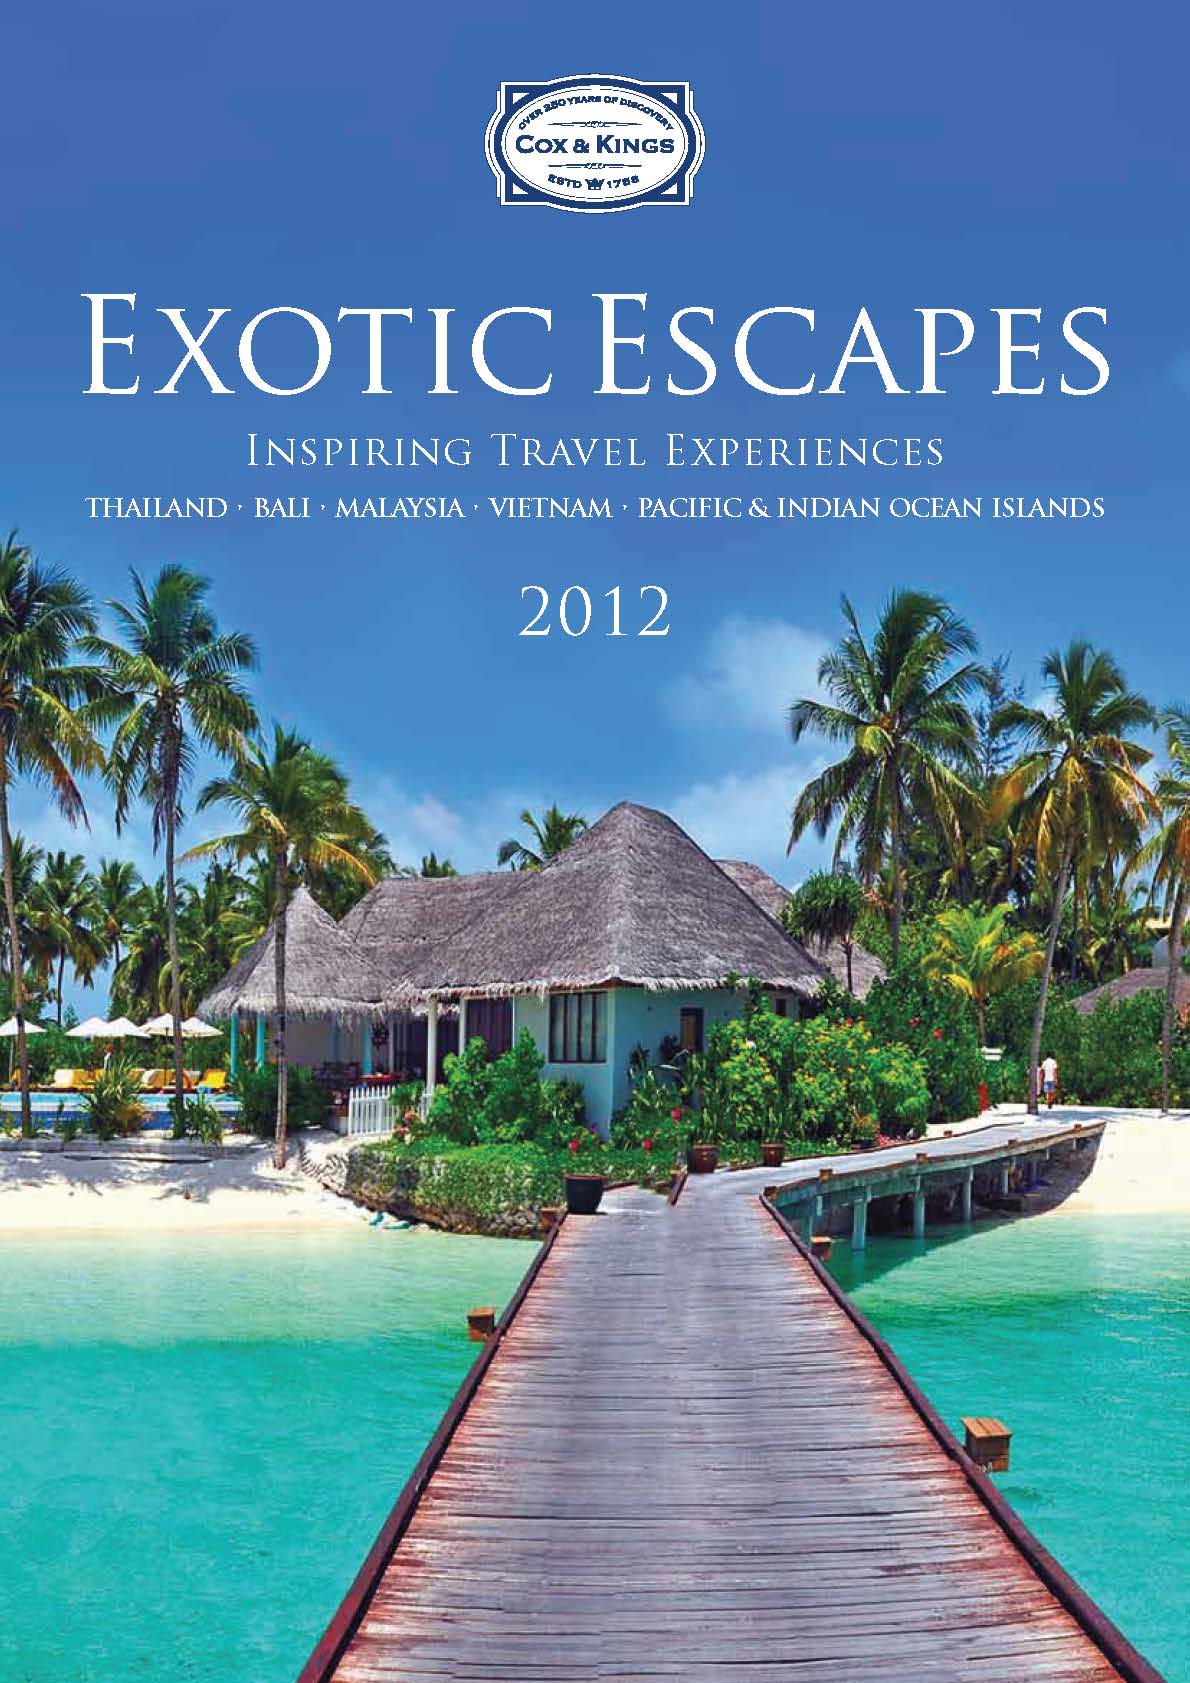 Travel Daily | Cox & Kings - Exotic Escapes 2012